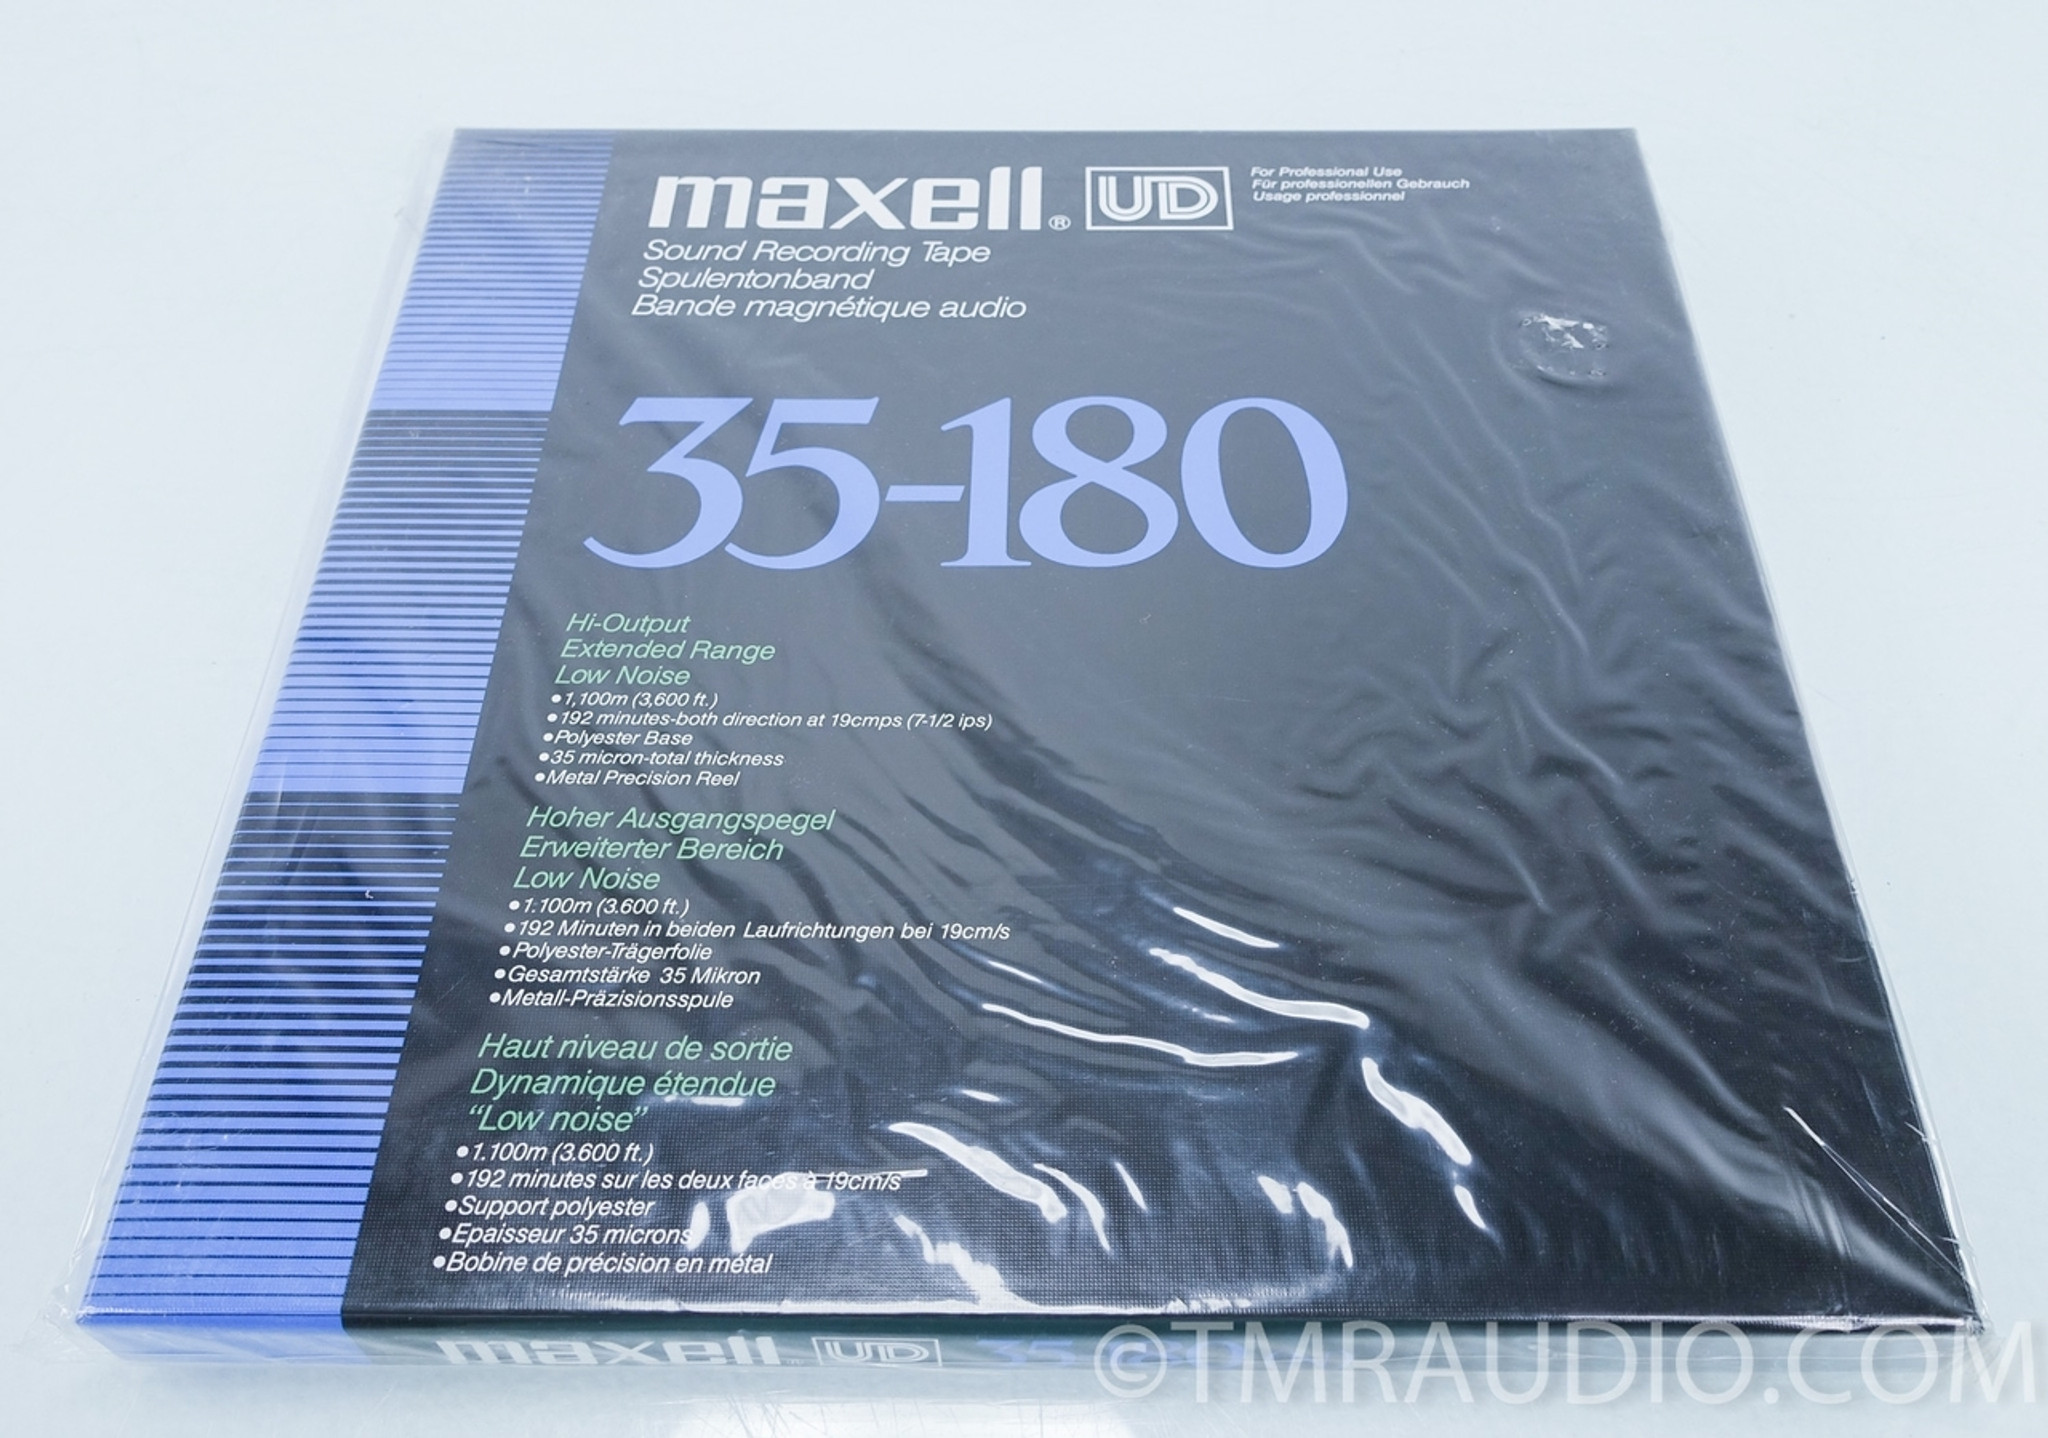 Maxell Reel to Reel Tape - Model: UD 35-180